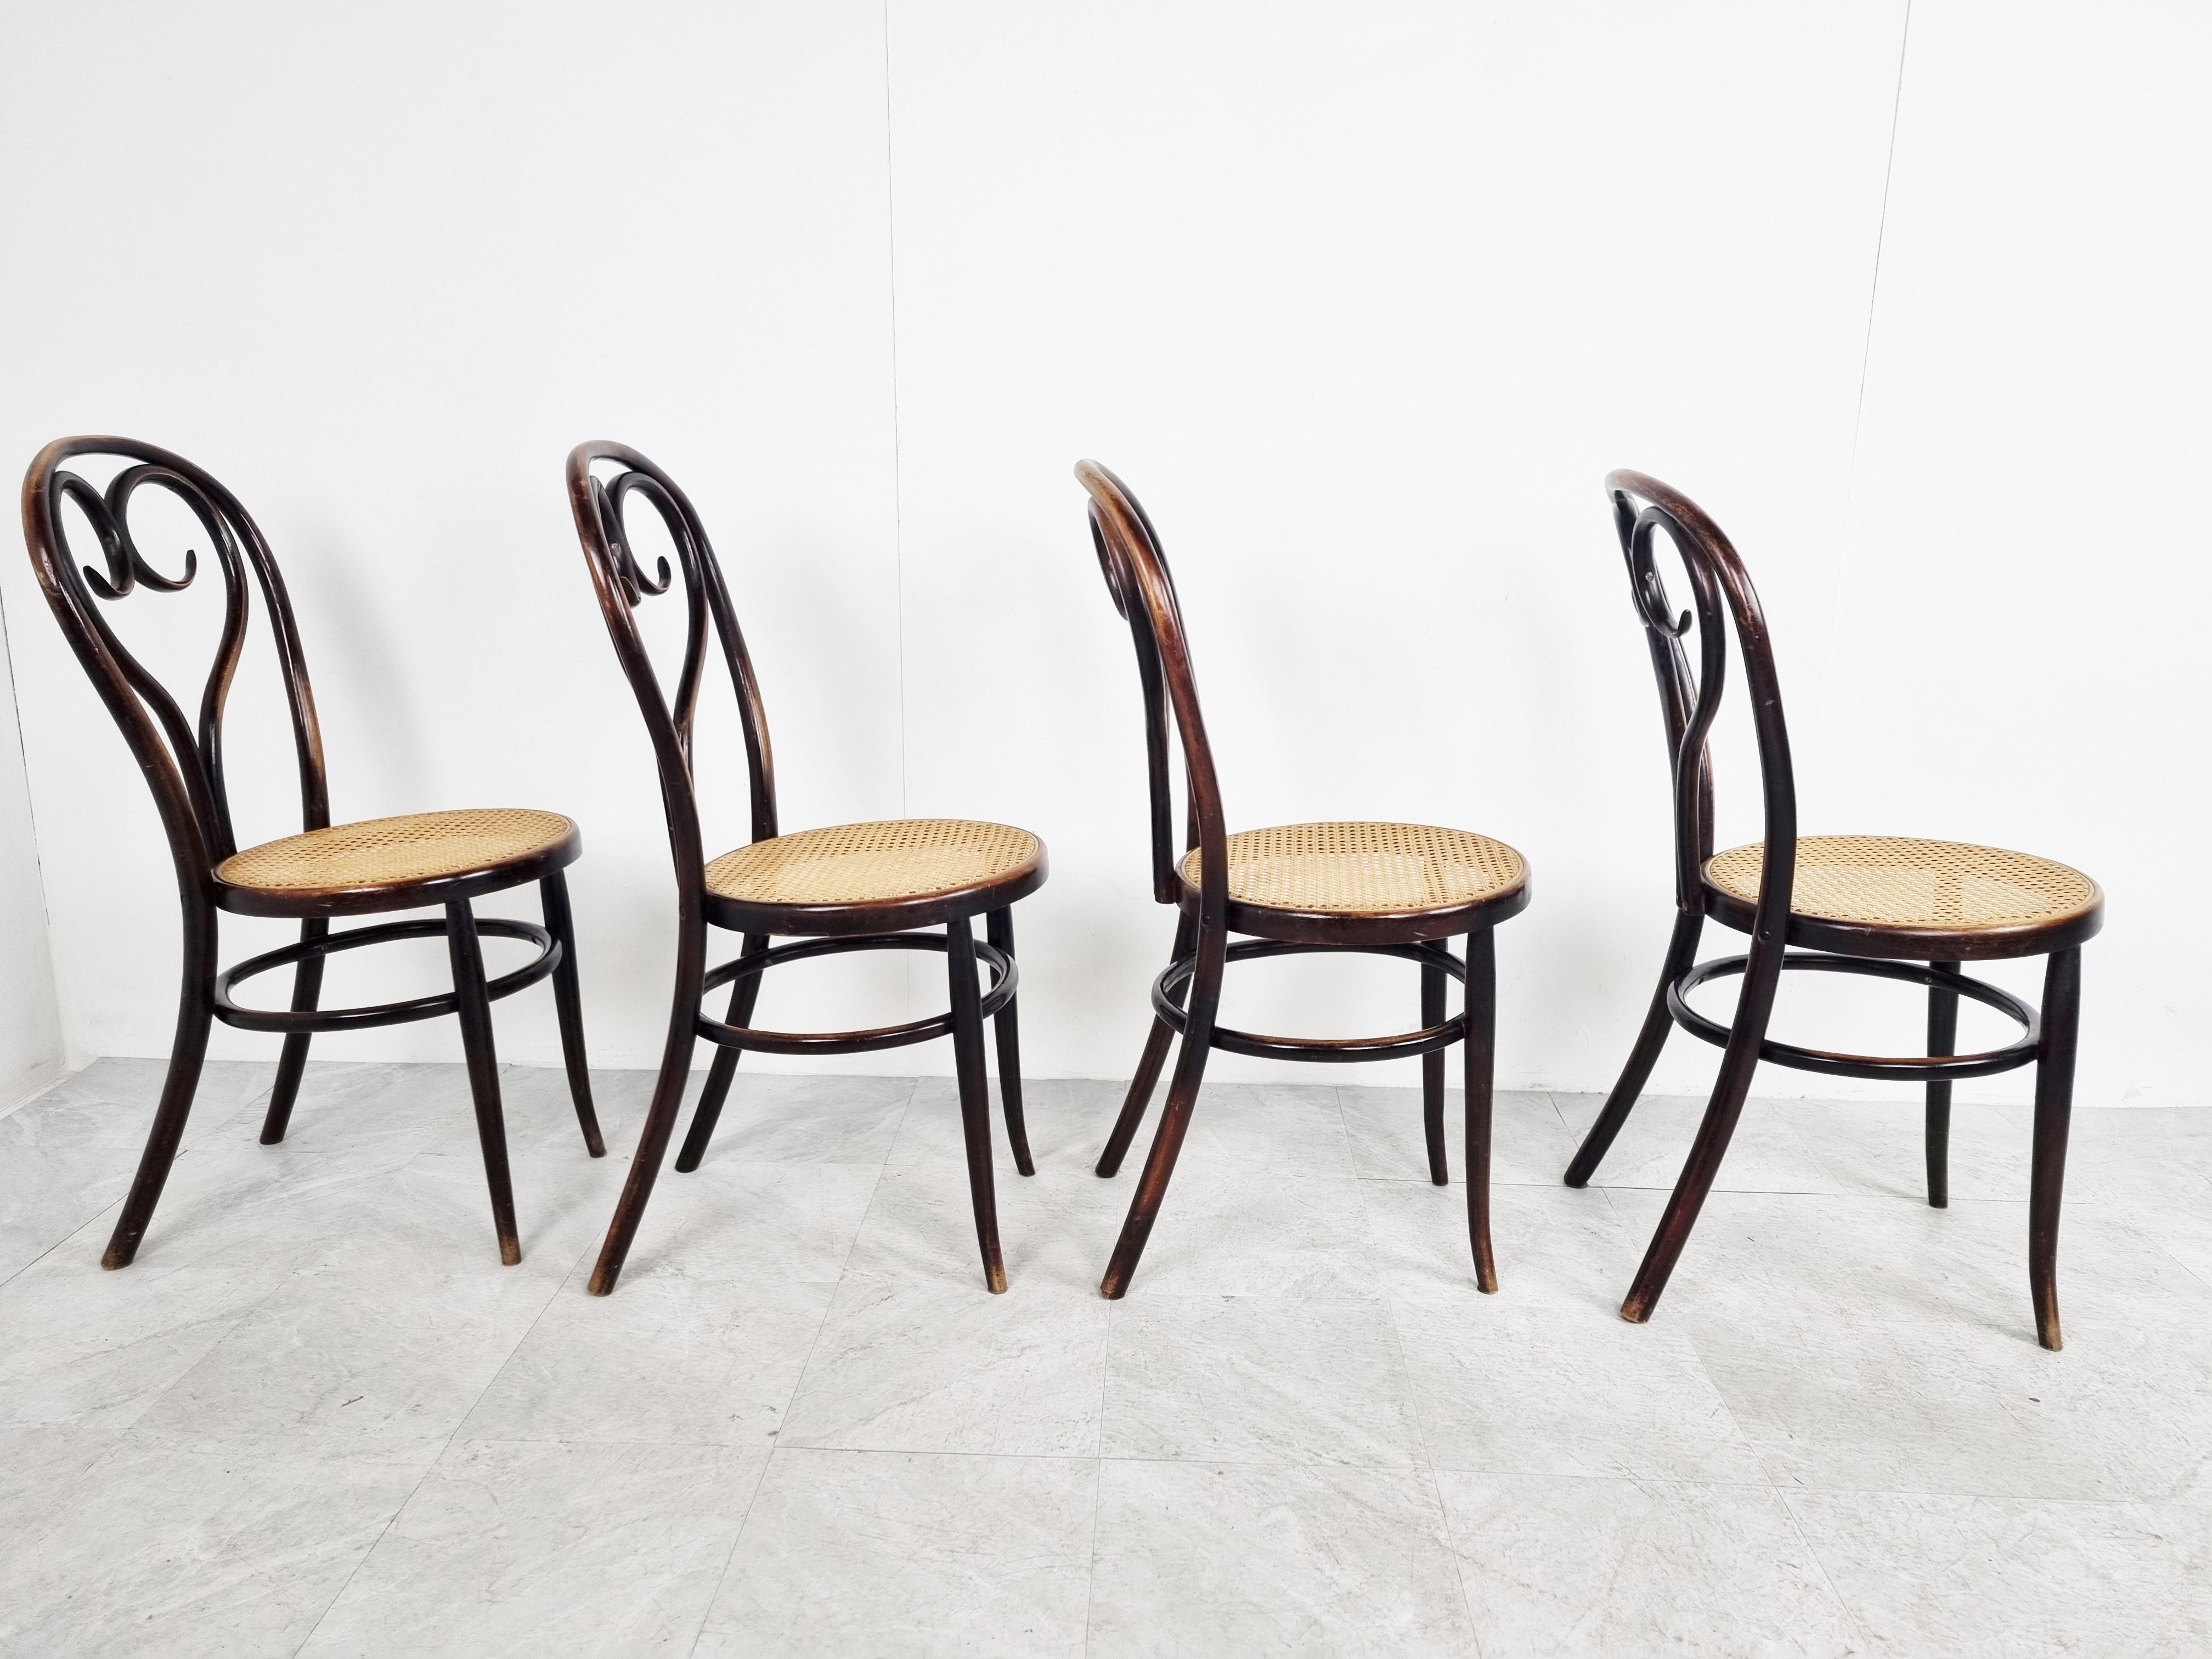 Austrian Thonet style bentwood Dining Chairs, 1920s